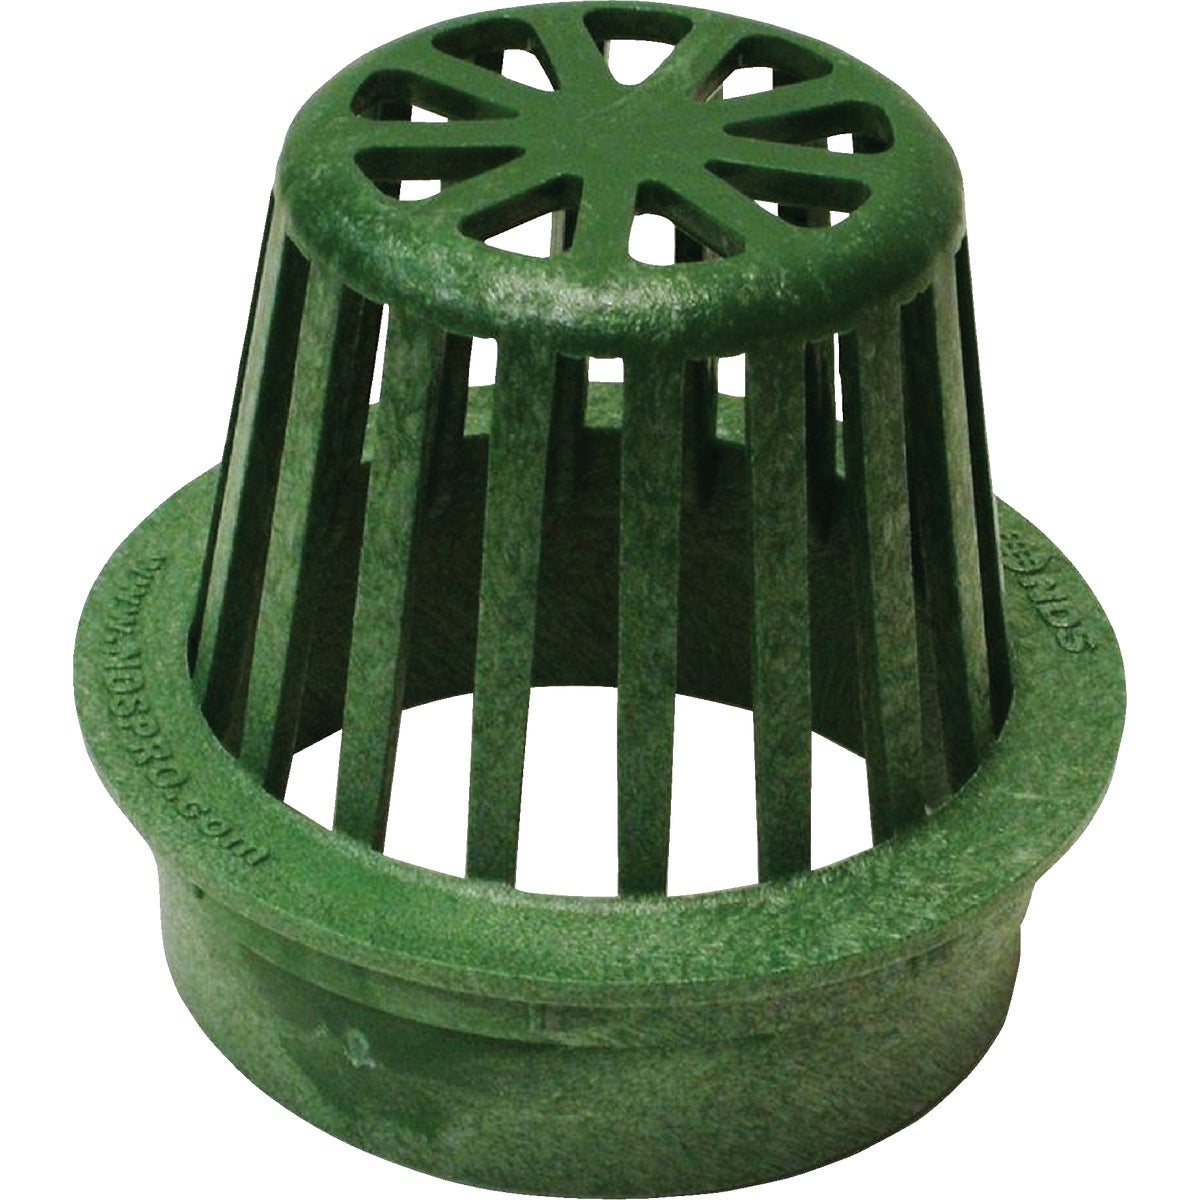 Item 435449, Fits 4" sewer and drain pipe and fittings, and 4" corrugated pipe